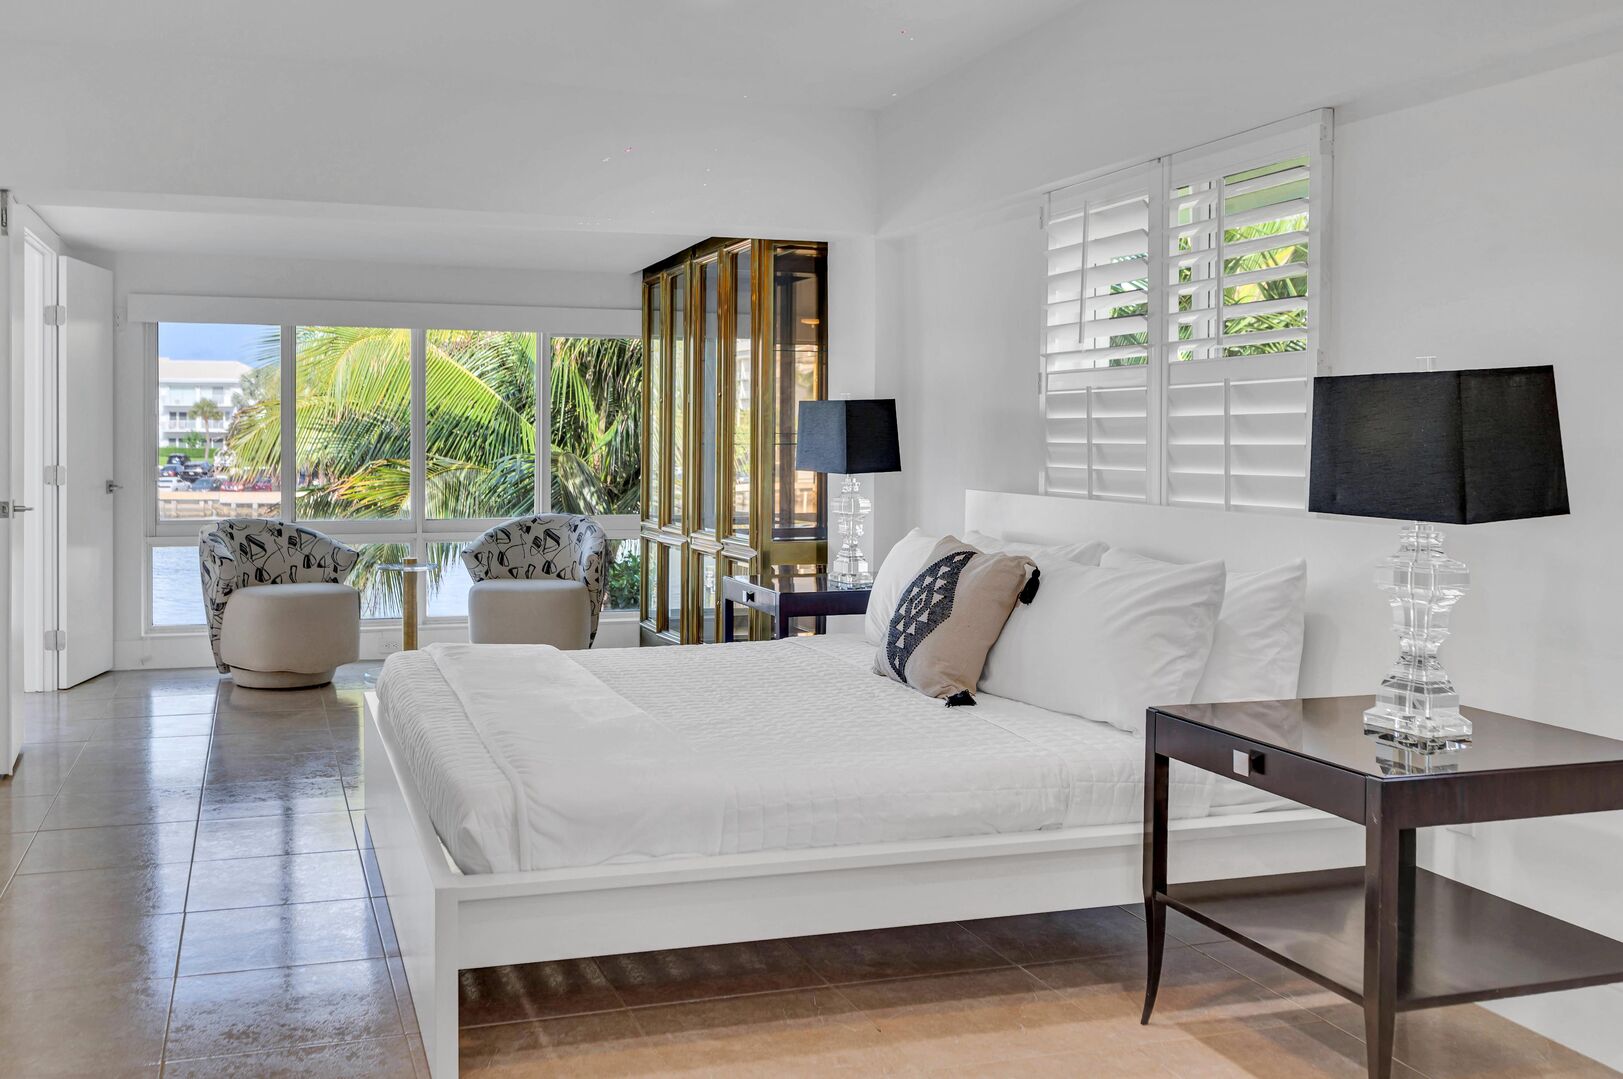 The primary bedroom boasting waterfront views features a king size bed, Smart TV, and a desk.